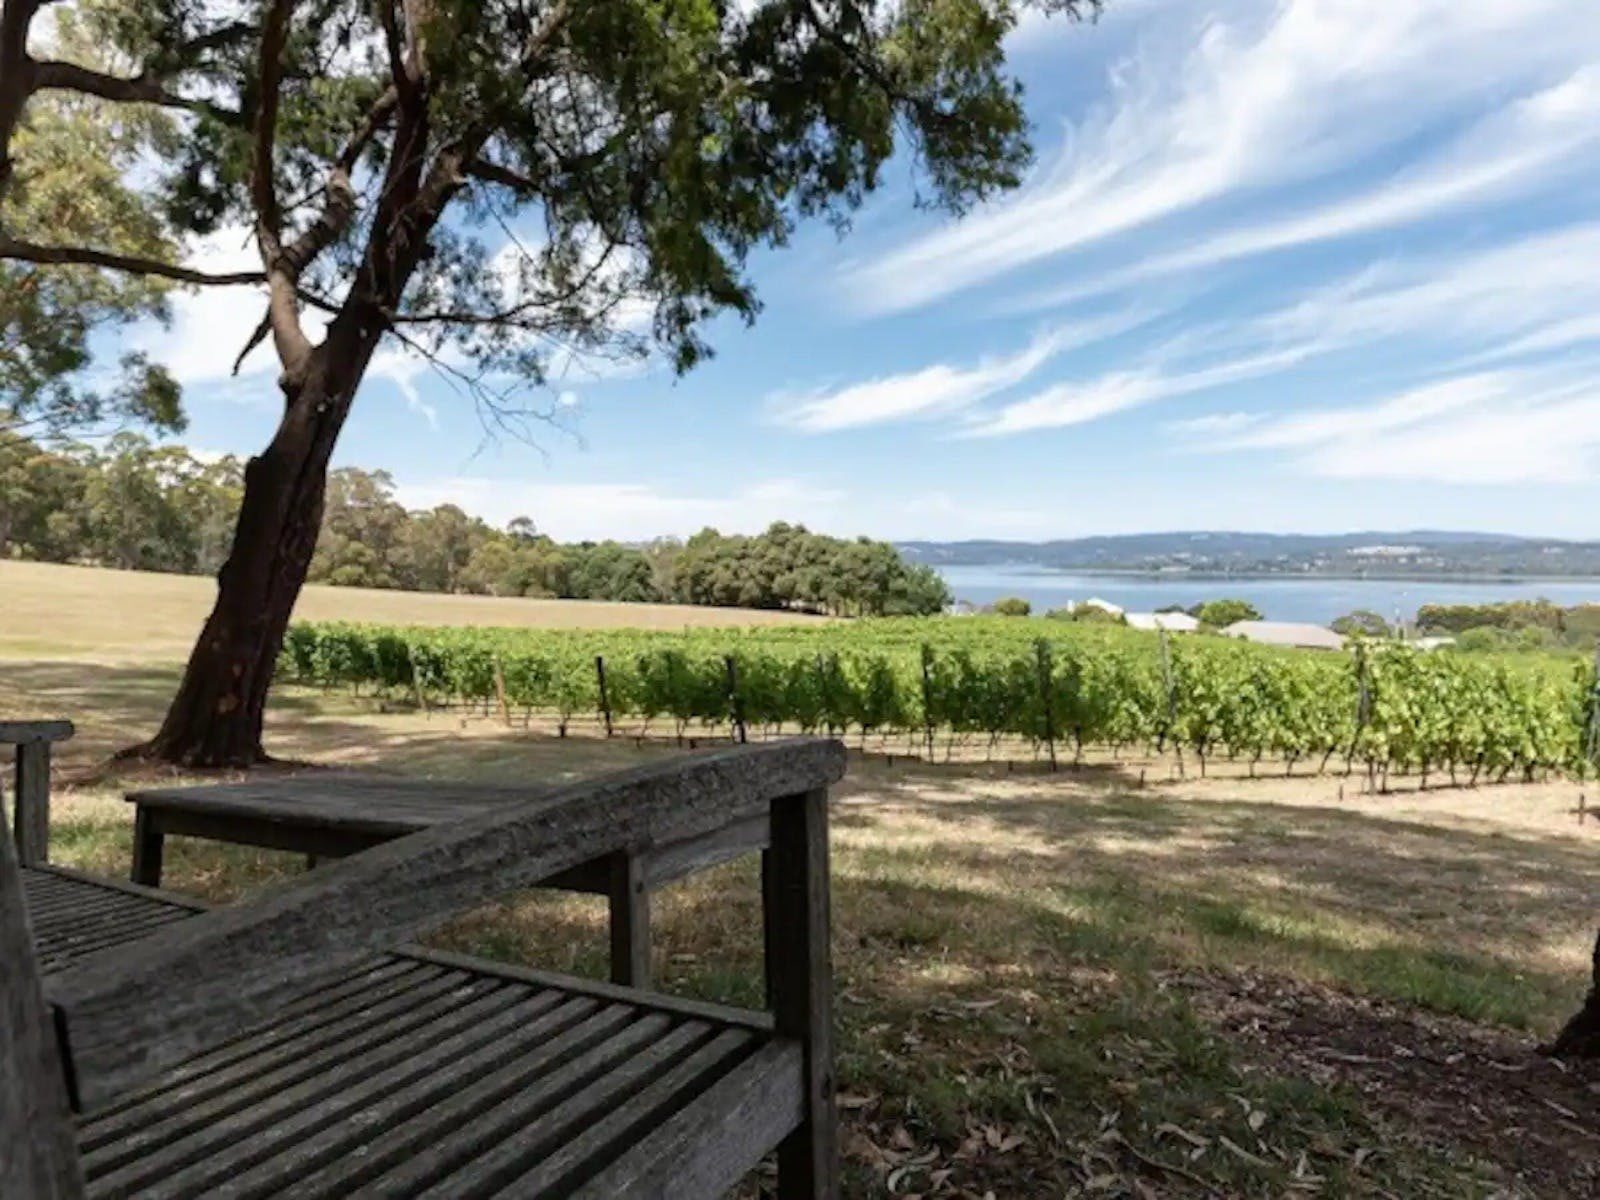 Looking at the views of the Tamar River. Vineyard in the background.